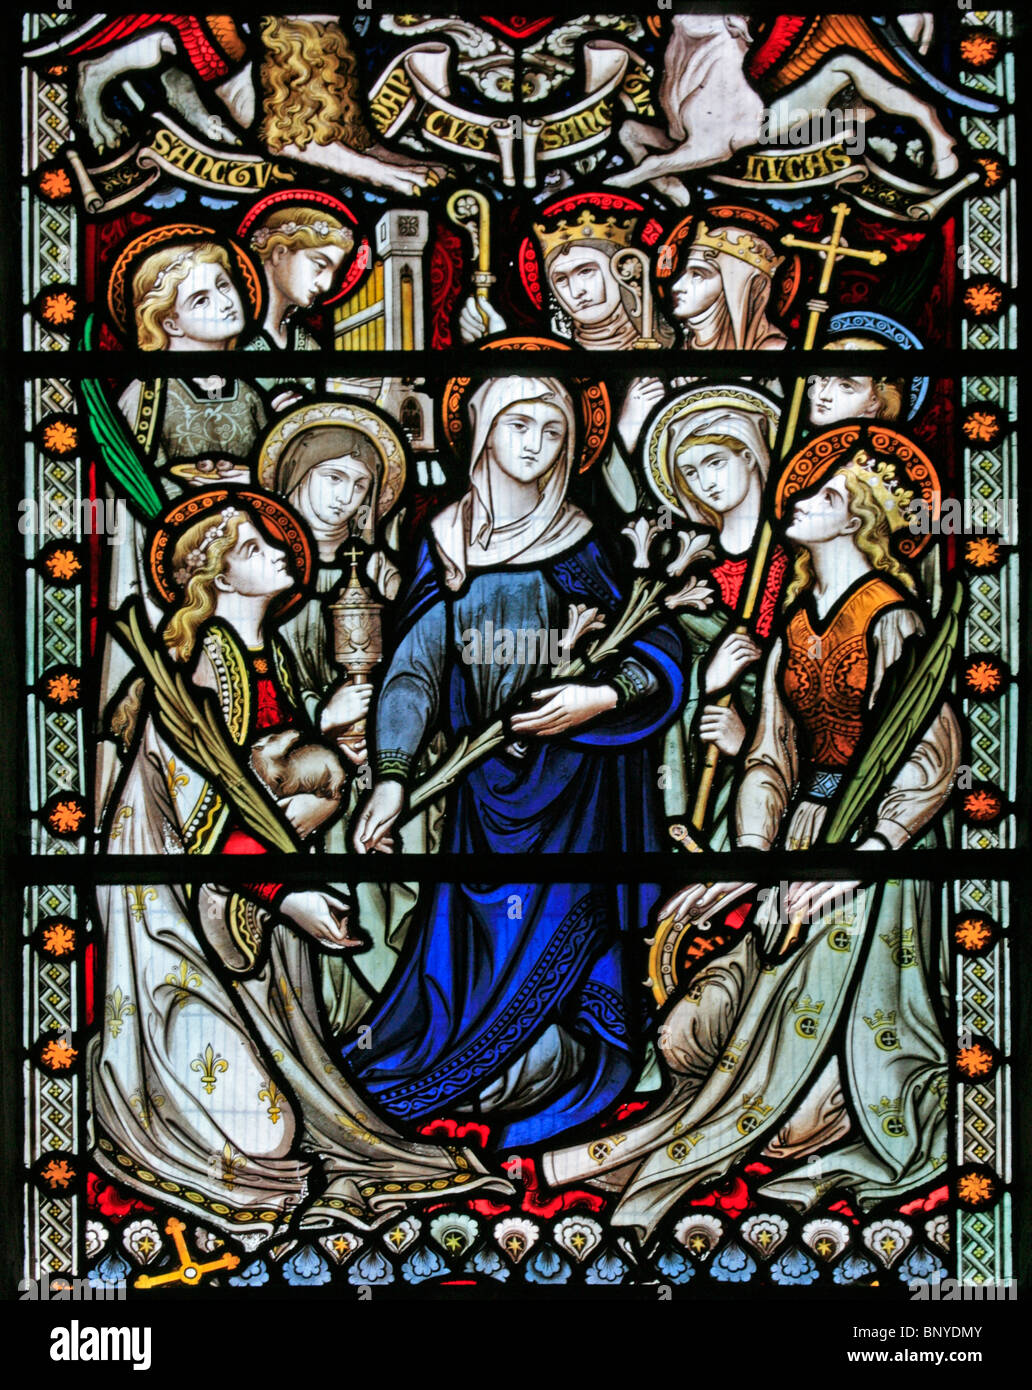 A stained glass window depicting the Virgin Mary surrounded by female saints, All Saints Church, Ladbroke, Warwickshire Stock Photo